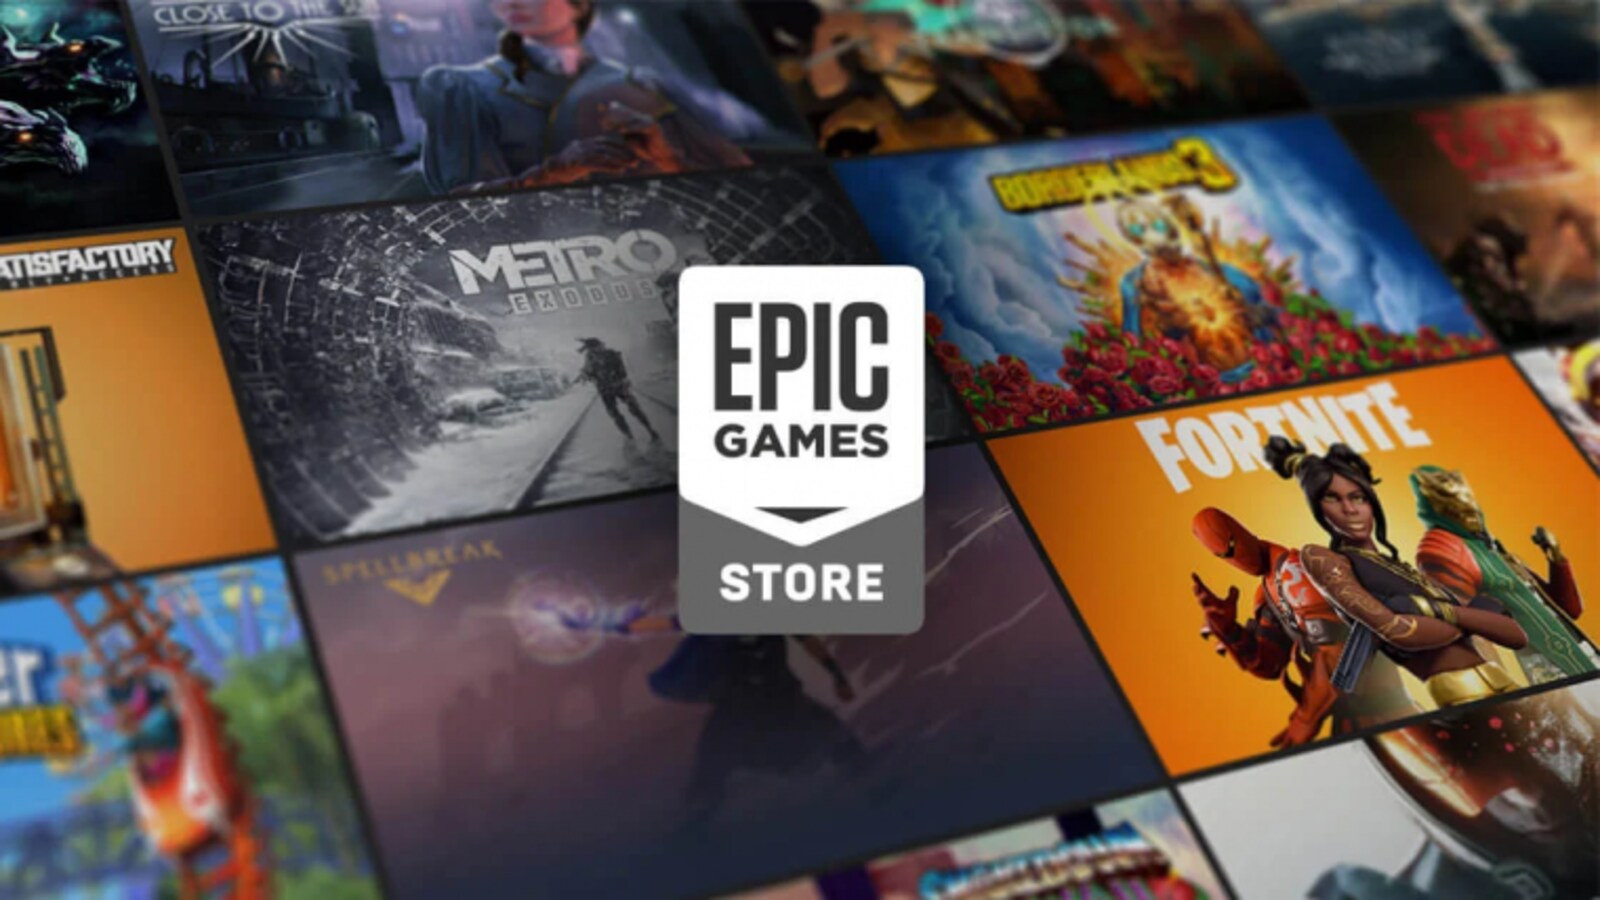 Epic Games Store in Argentina is sold in US Dollars (unlike Steam), I think  they made an error when adding the game there : r/TormentedSouls